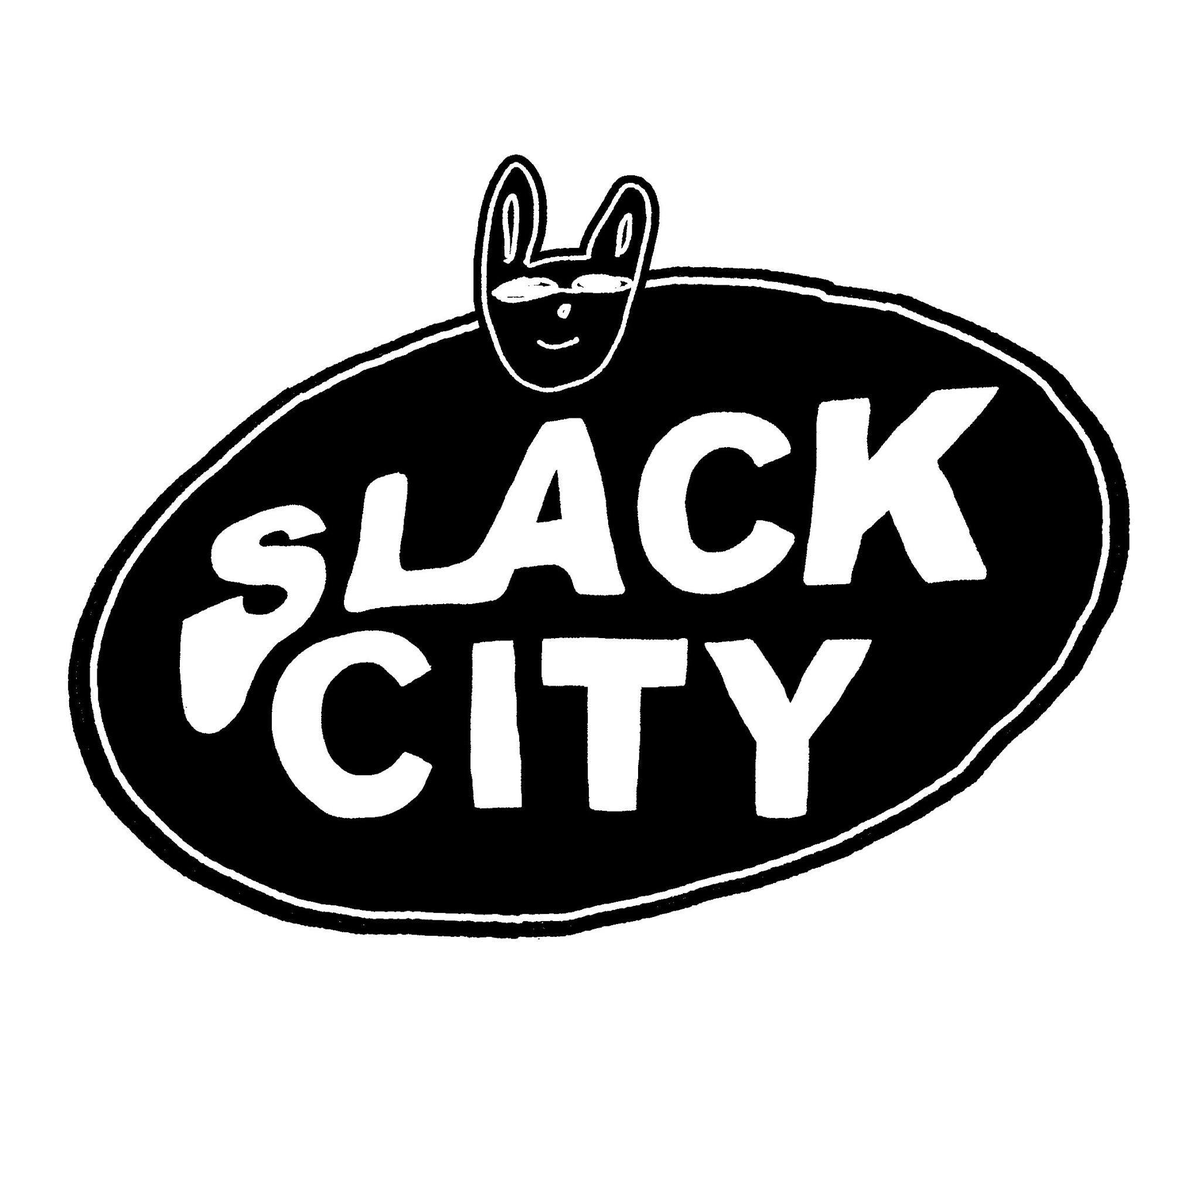 #ICYMI listen back to the latest #HackCity @slackcityradio - @JegardUK & @rosiejamesie chat all things #StandUpComedy in #BrightonAndHove w/ guests #StephCassin & @anthonyayton 

+ #ComedySongs #LiveComedyListings #SupportLiveComedy

totallyradio.com/shows/hack-cit…